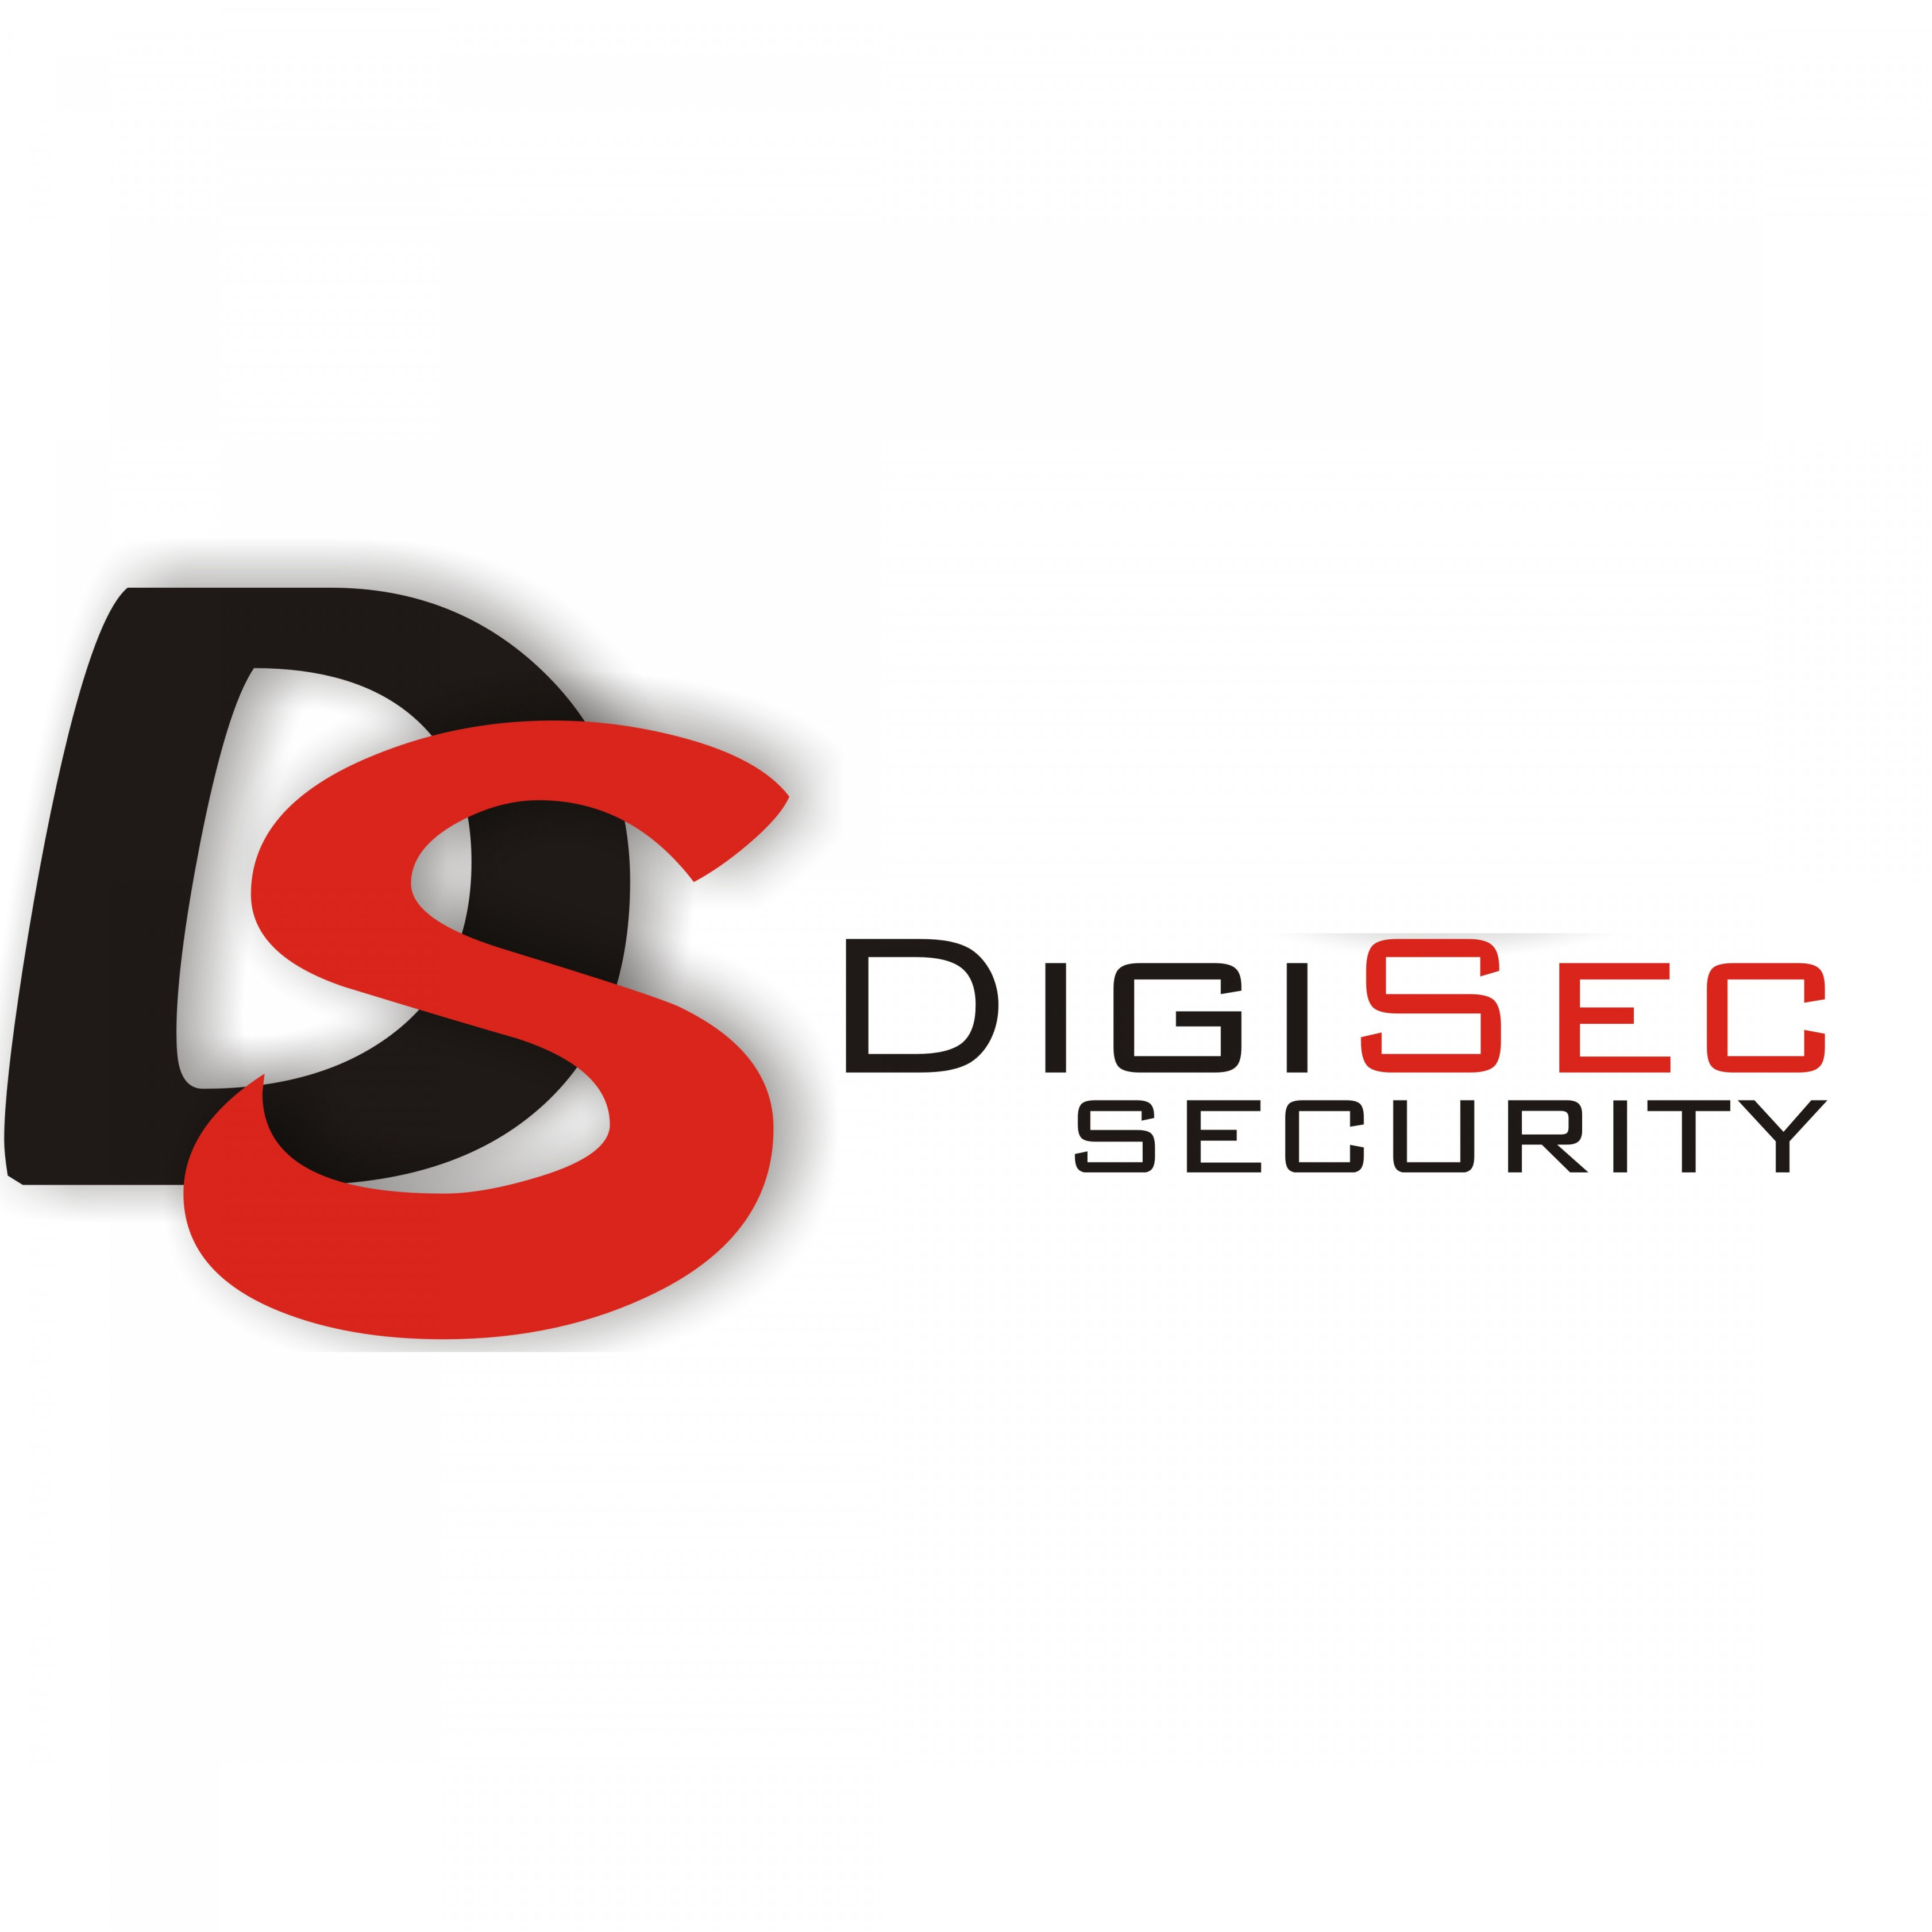 DIGISEC OÜ - Security systems service activities in Tartu